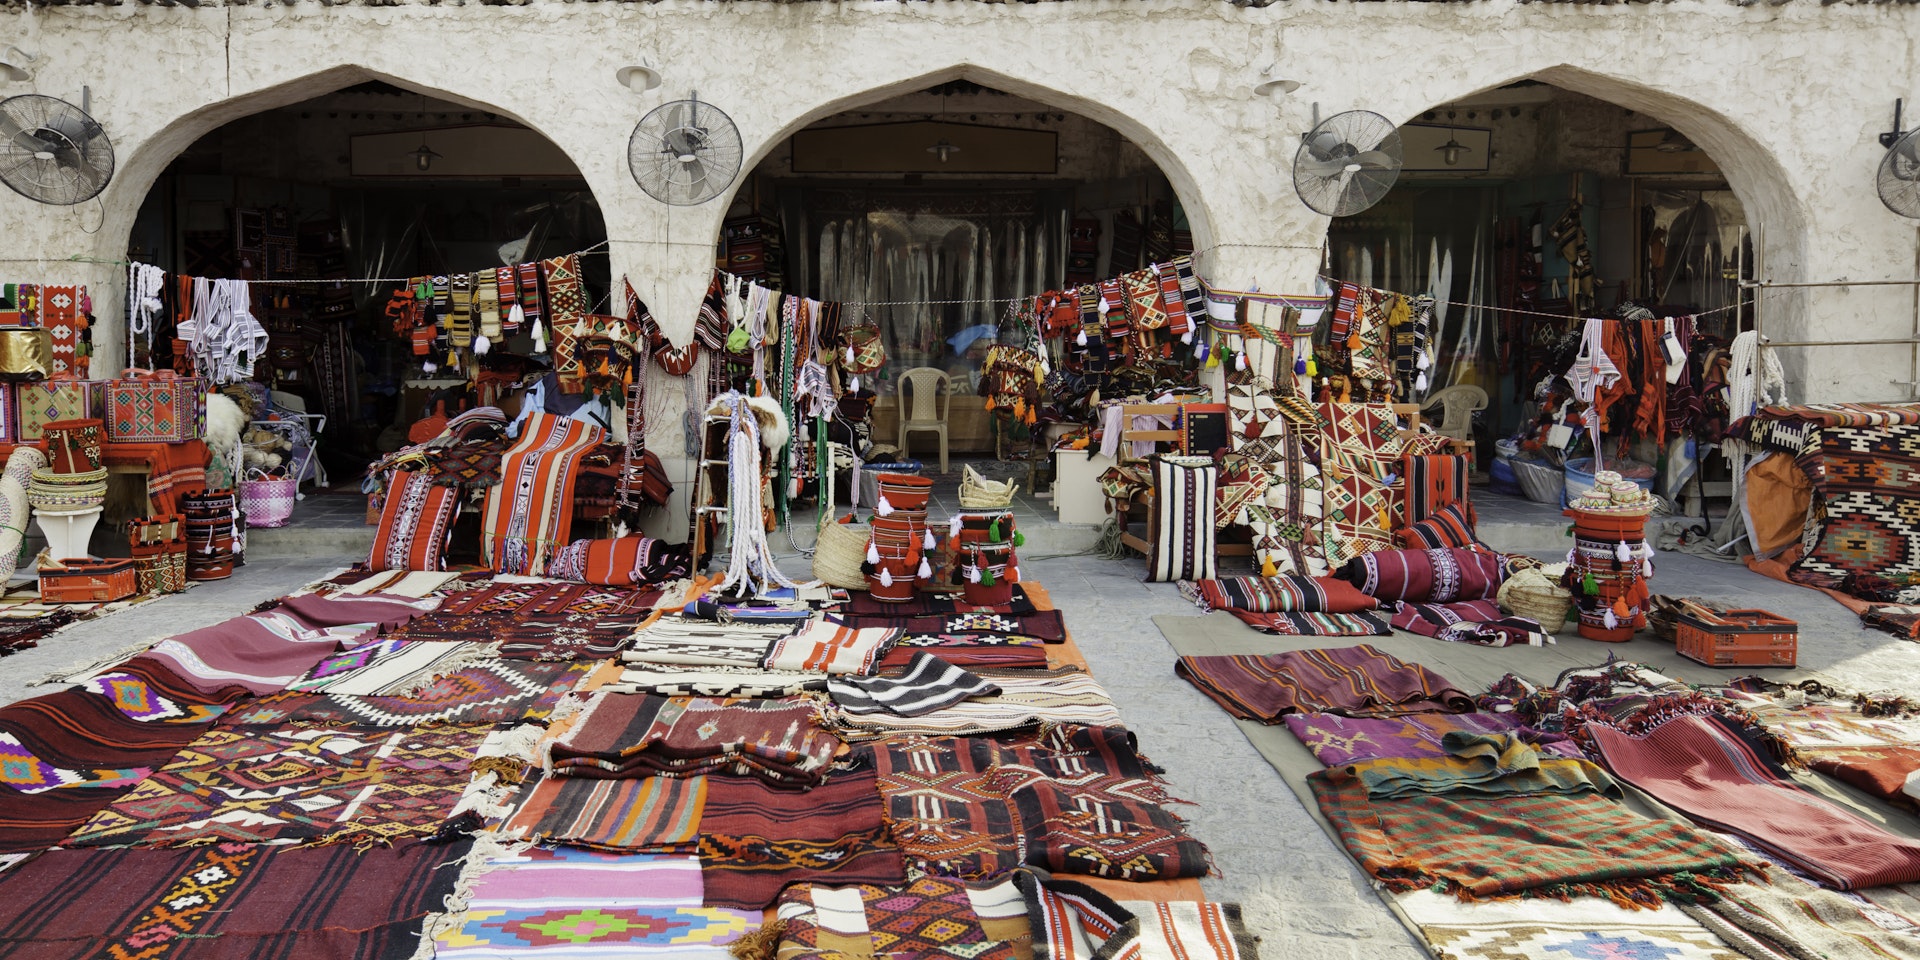 Textile shop along the street in the Souq Waqif area in Doha, Qatar